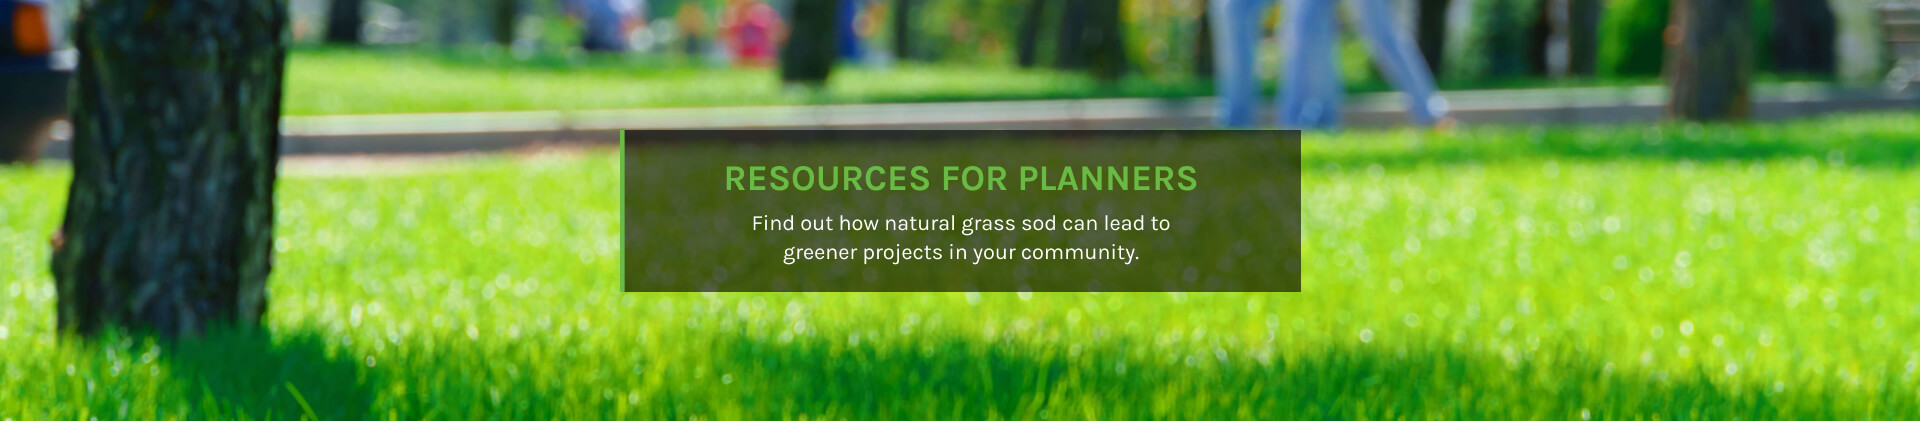 RESOURCES FOR PLANNERS Find out how natural grass sod can lead to greener projects in your community.